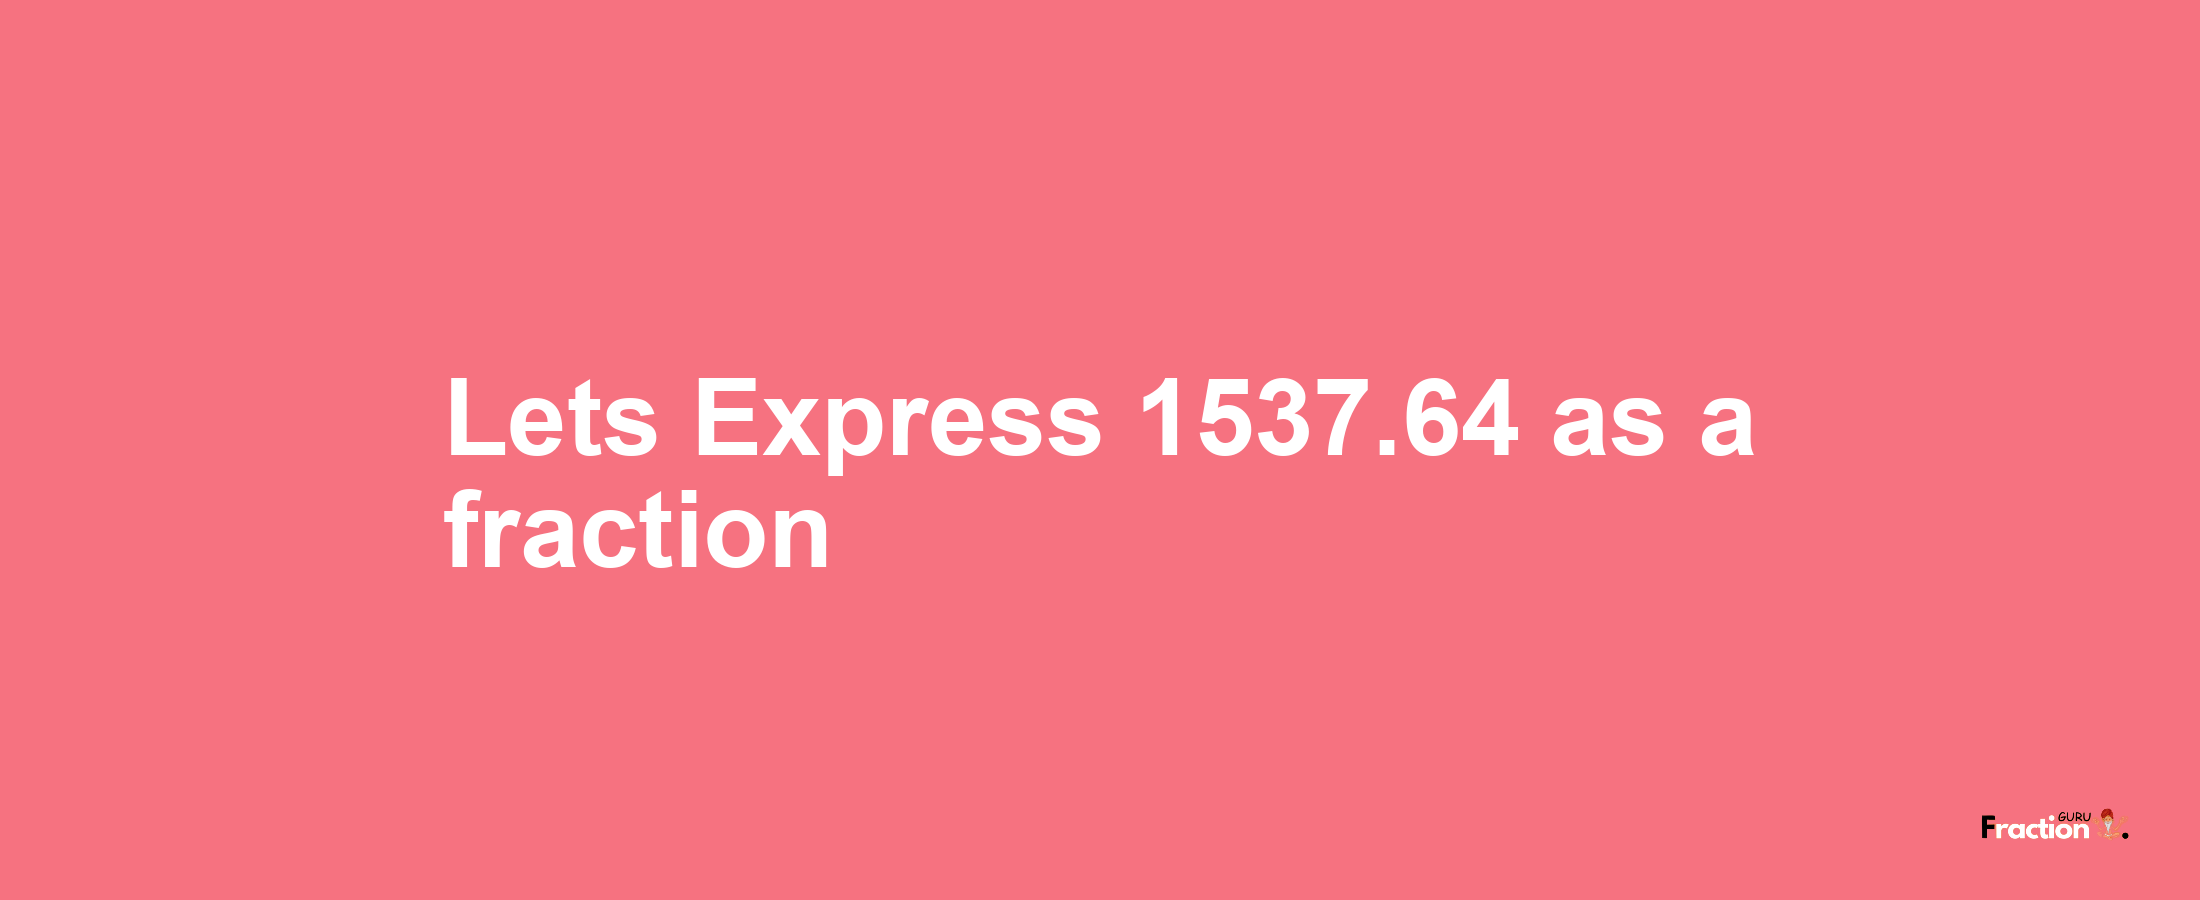 Lets Express 1537.64 as afraction